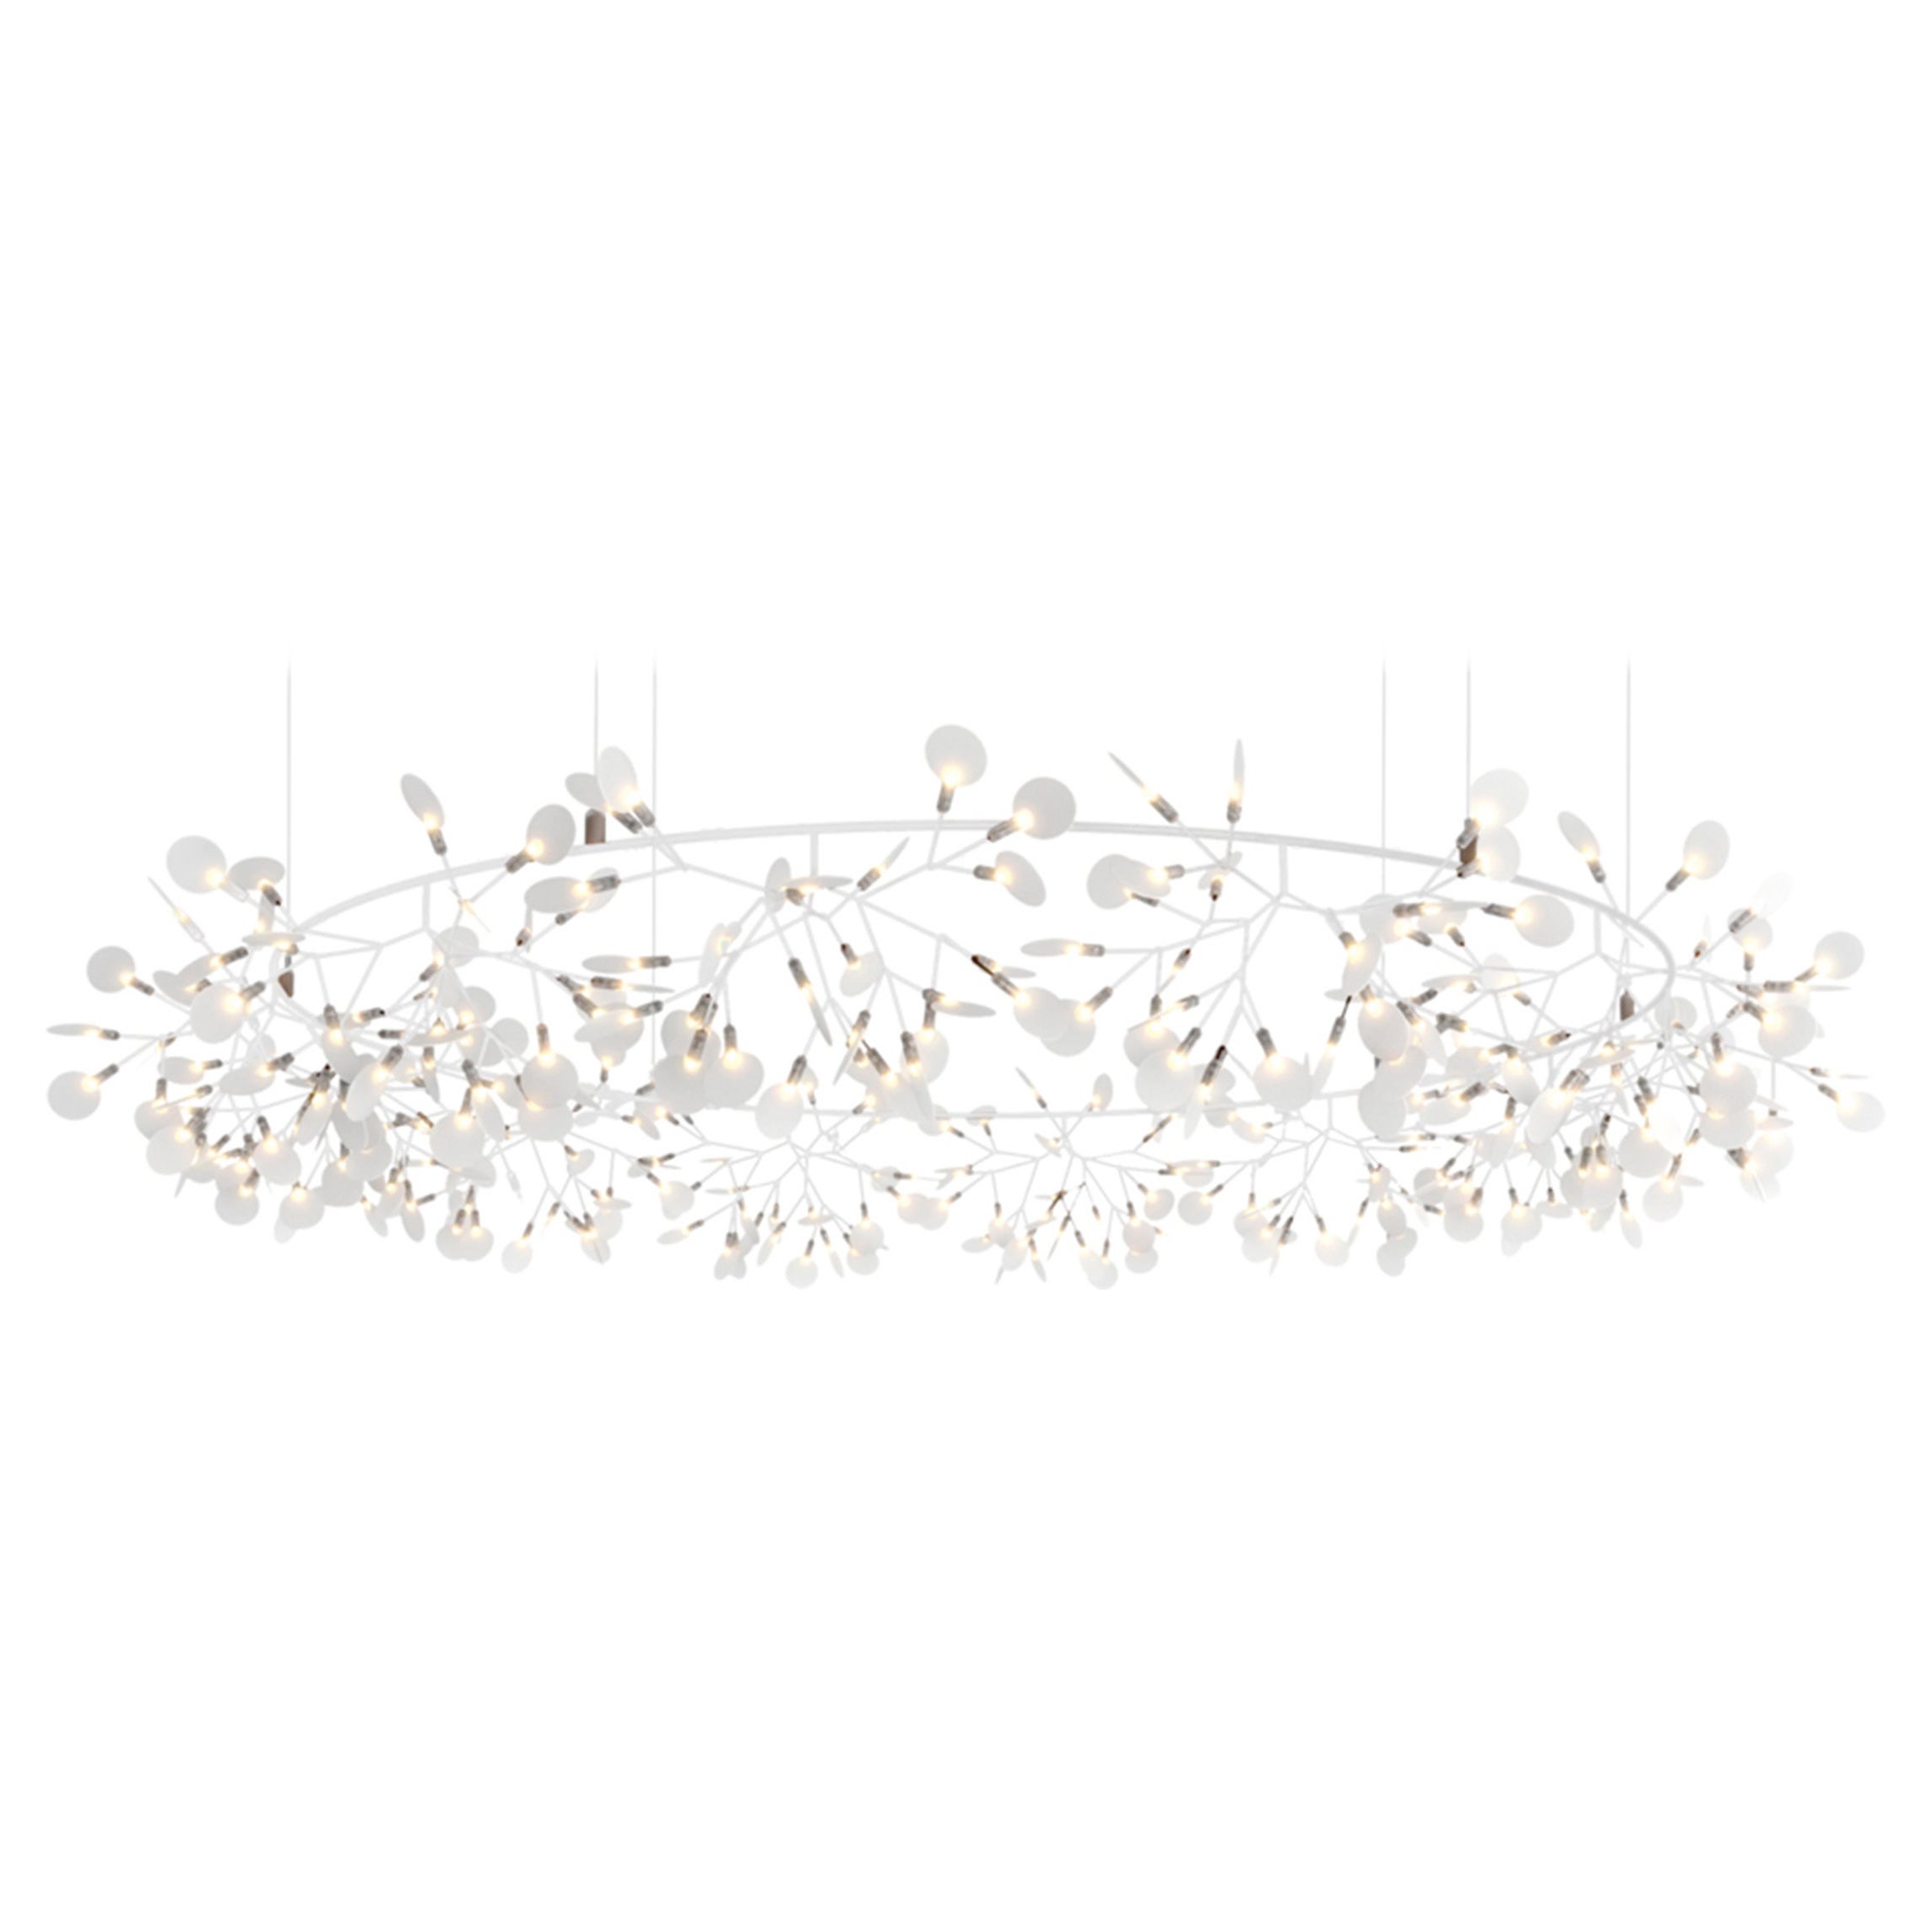 Moooi Heracleum The Big O Large Suspension Lamp in White by Bertjan Pot, 10m  For Sale